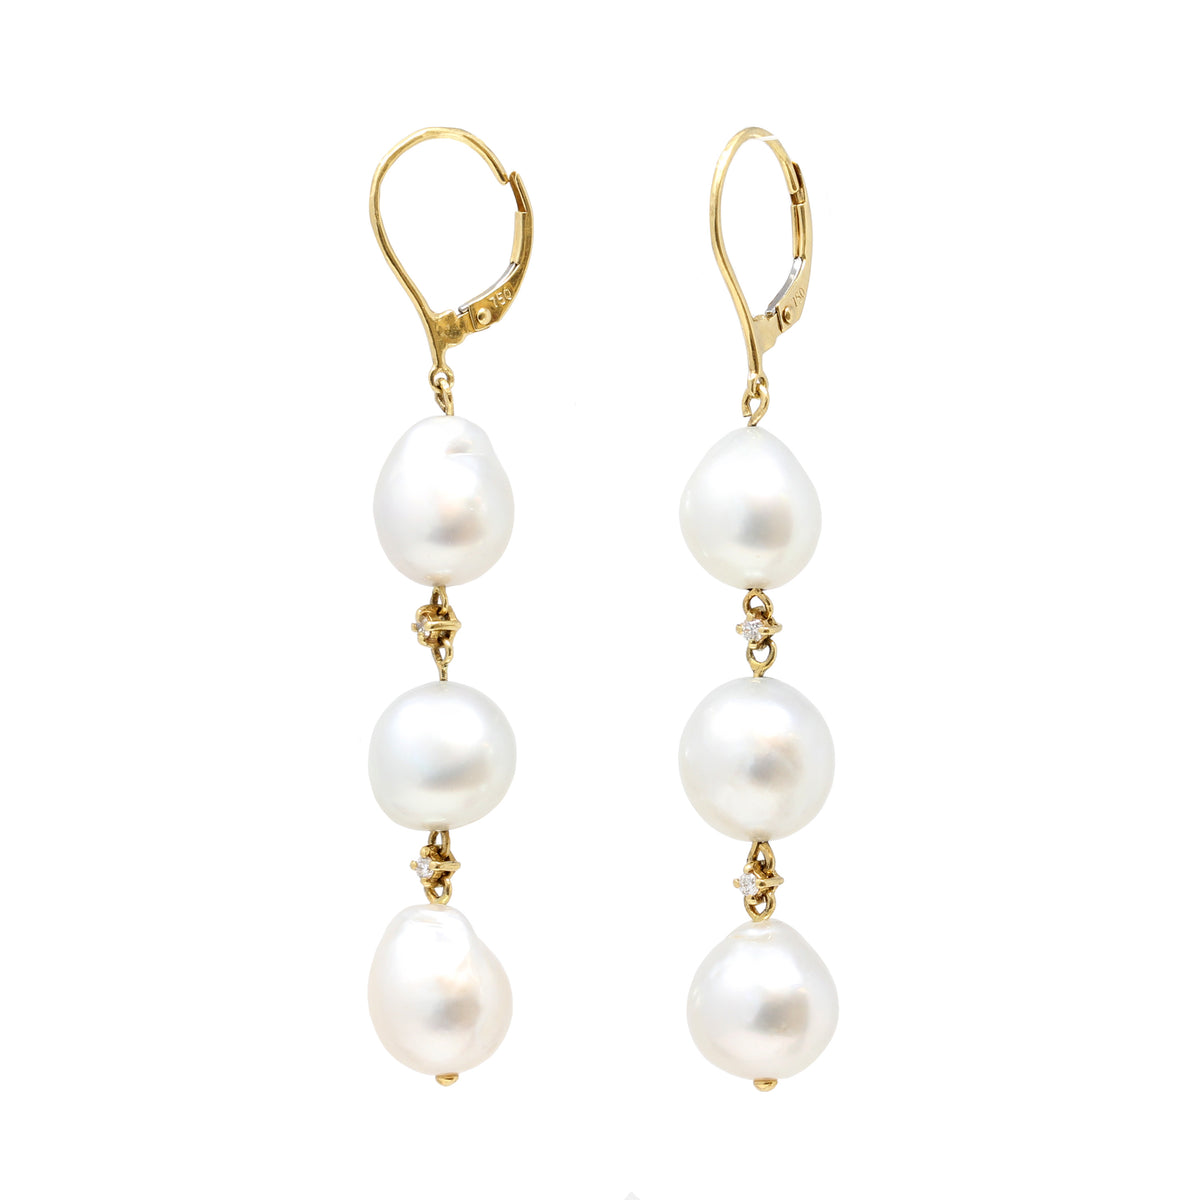 Pair of South Sea Baroque Pearls 18k Gold Dangling Earrings with Diamond Accents